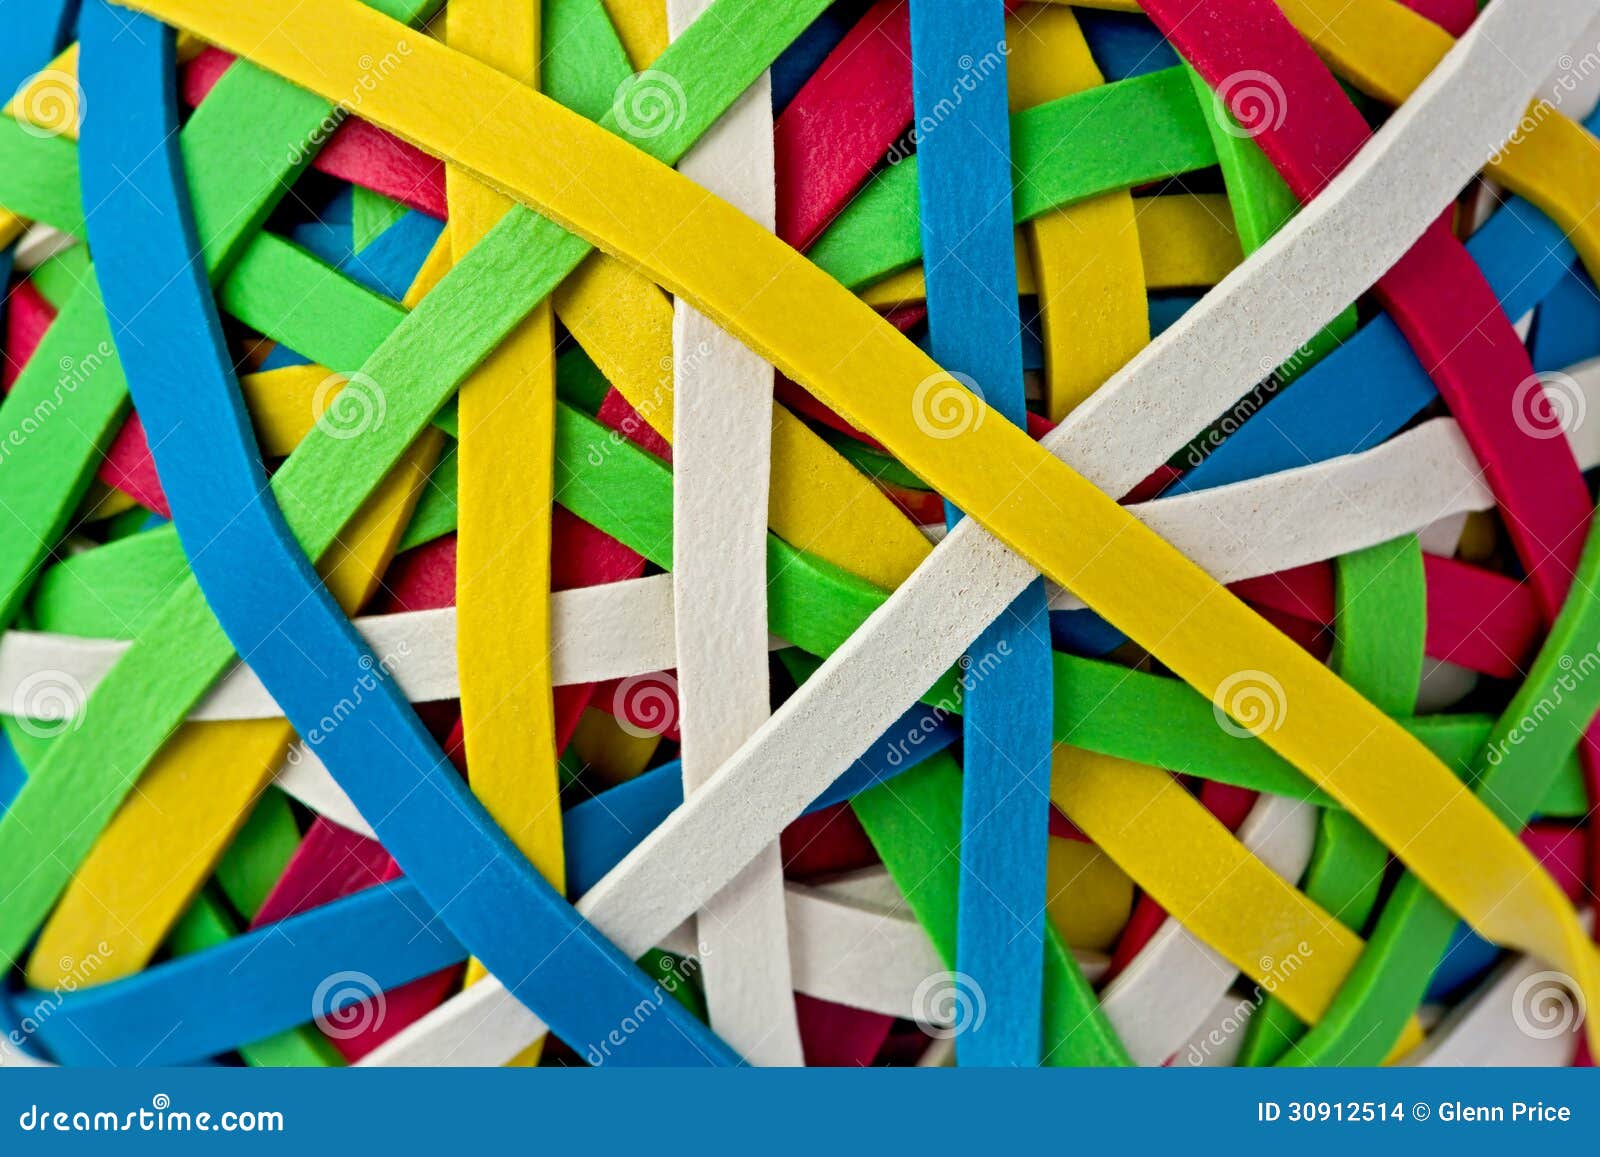 The colored rubber bands stock photo. Image of texture - 122604176